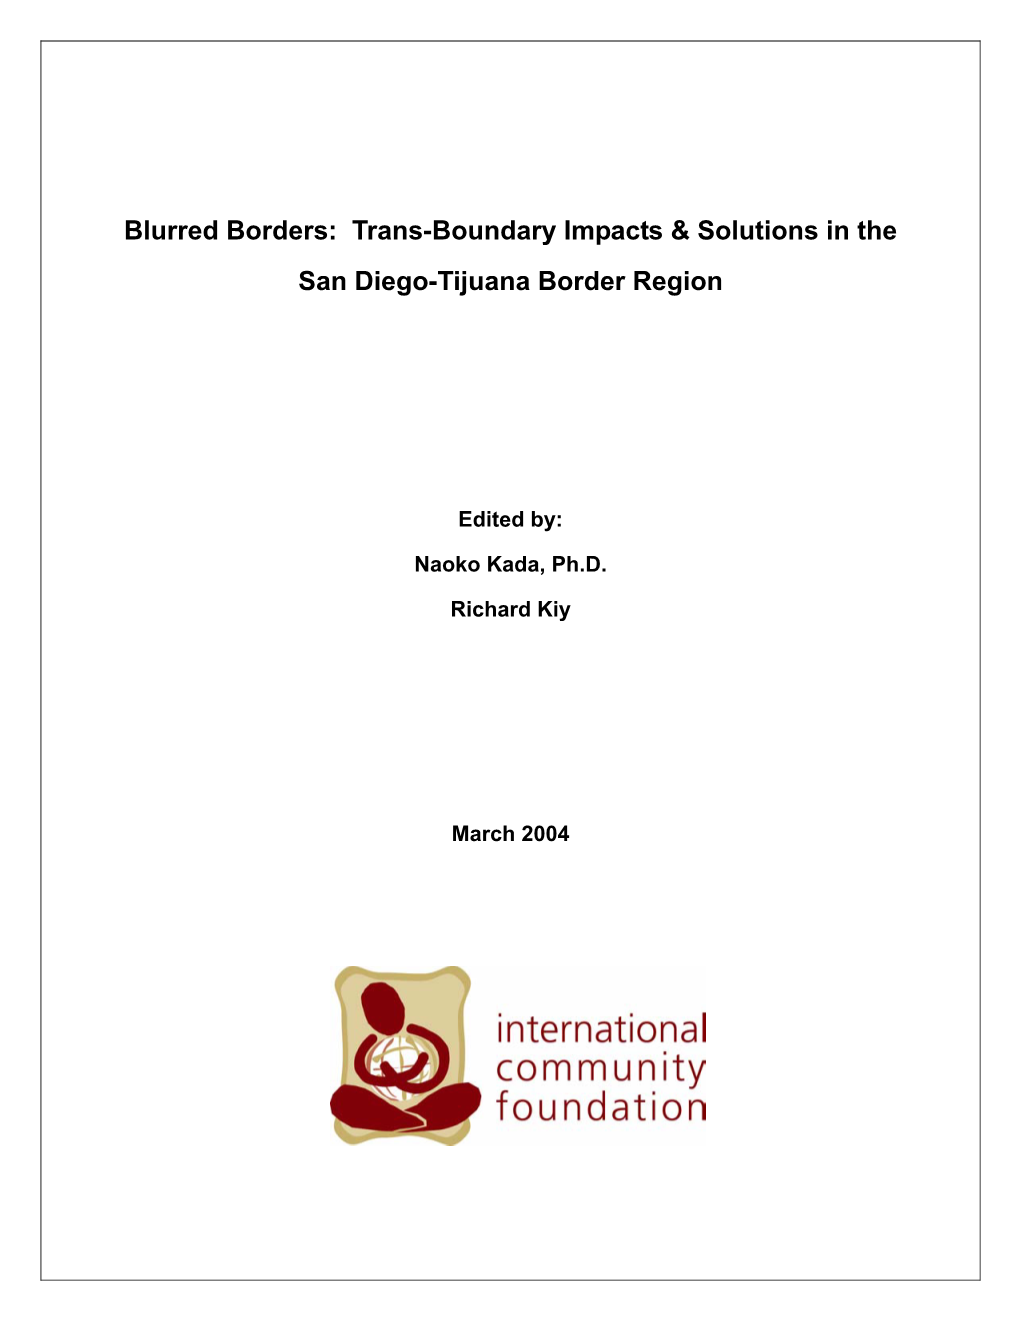 Blurred Borders: Trans-Boundary Impacts & Solutions in the San Diego-Tijuana Border Region